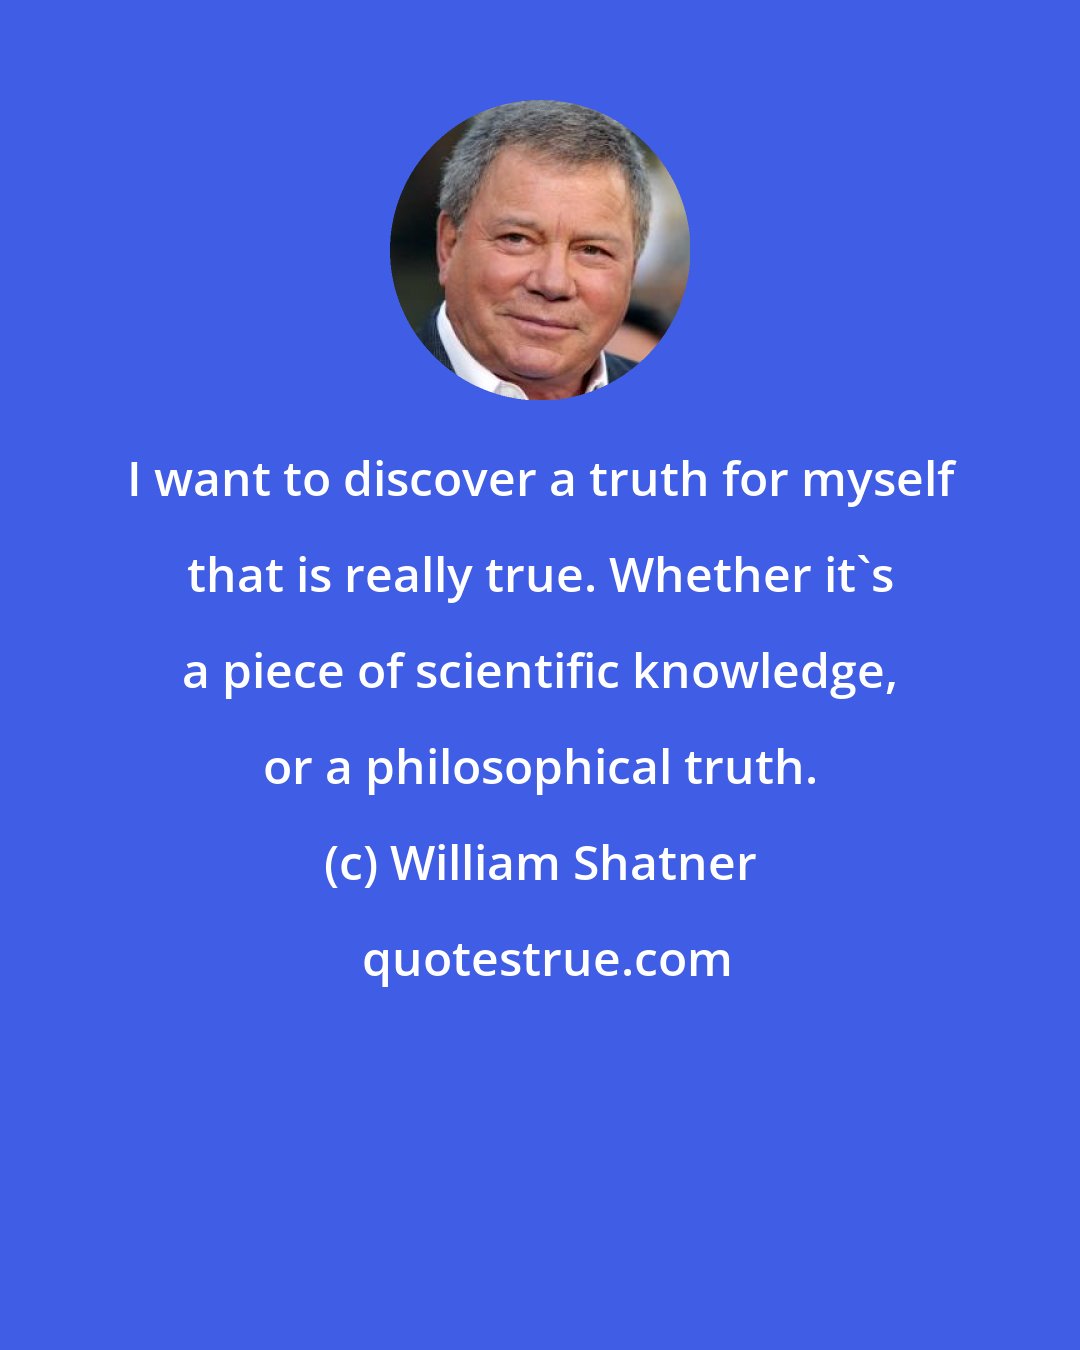 William Shatner: I want to discover a truth for myself that is really true. Whether it's a piece of scientific knowledge, or a philosophical truth.